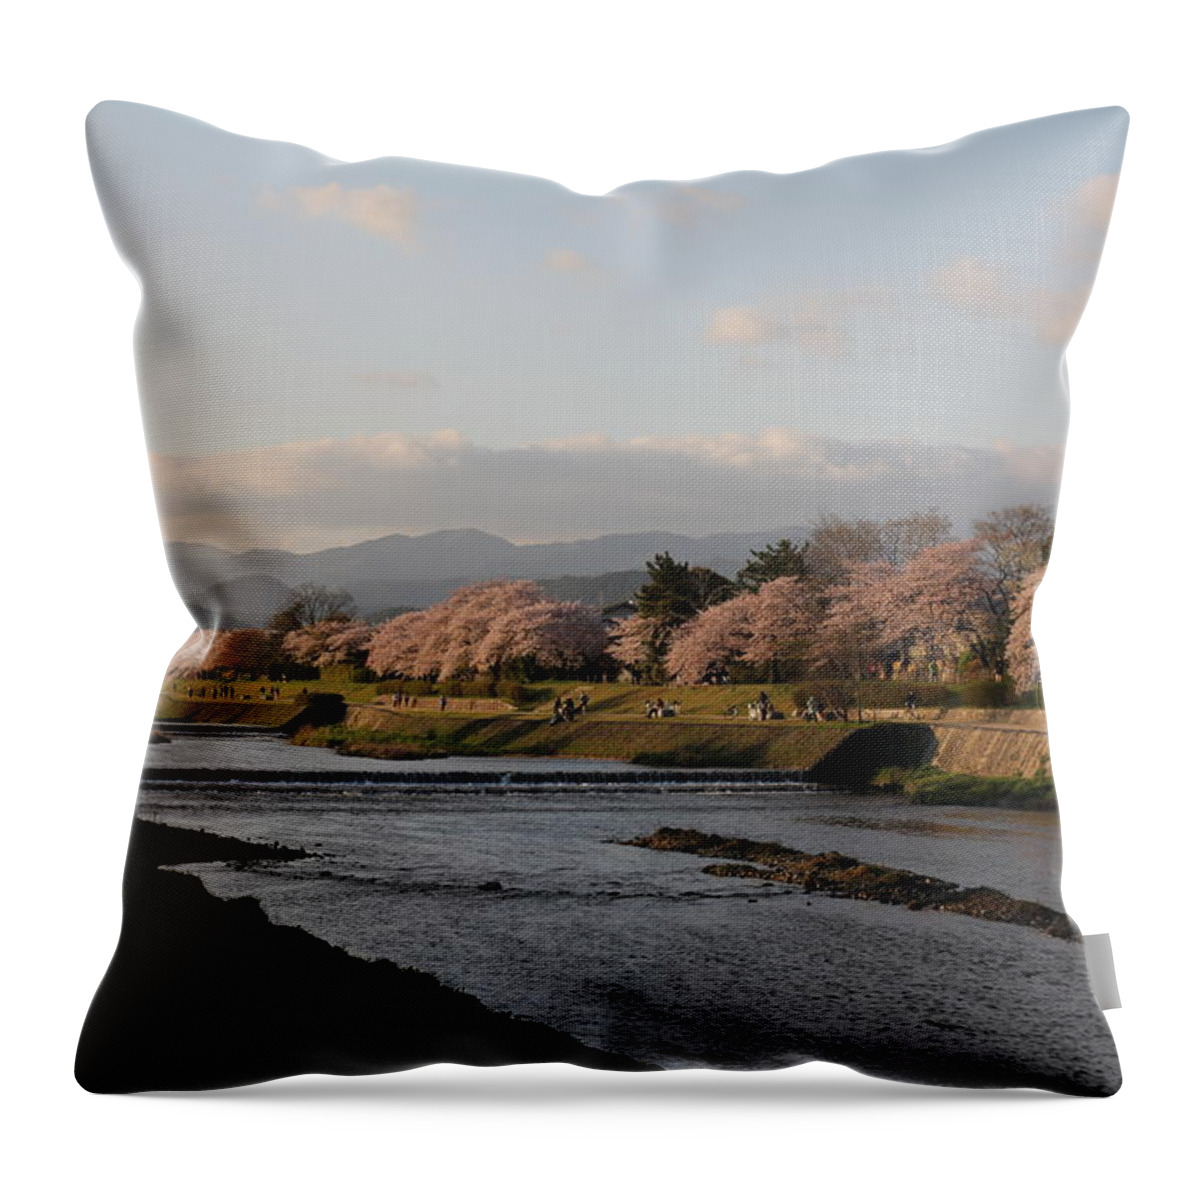 Outdoors Throw Pillow featuring the photograph Riverbank With Cherry Blossoms by Christian Kaden, Satori-nihon.de